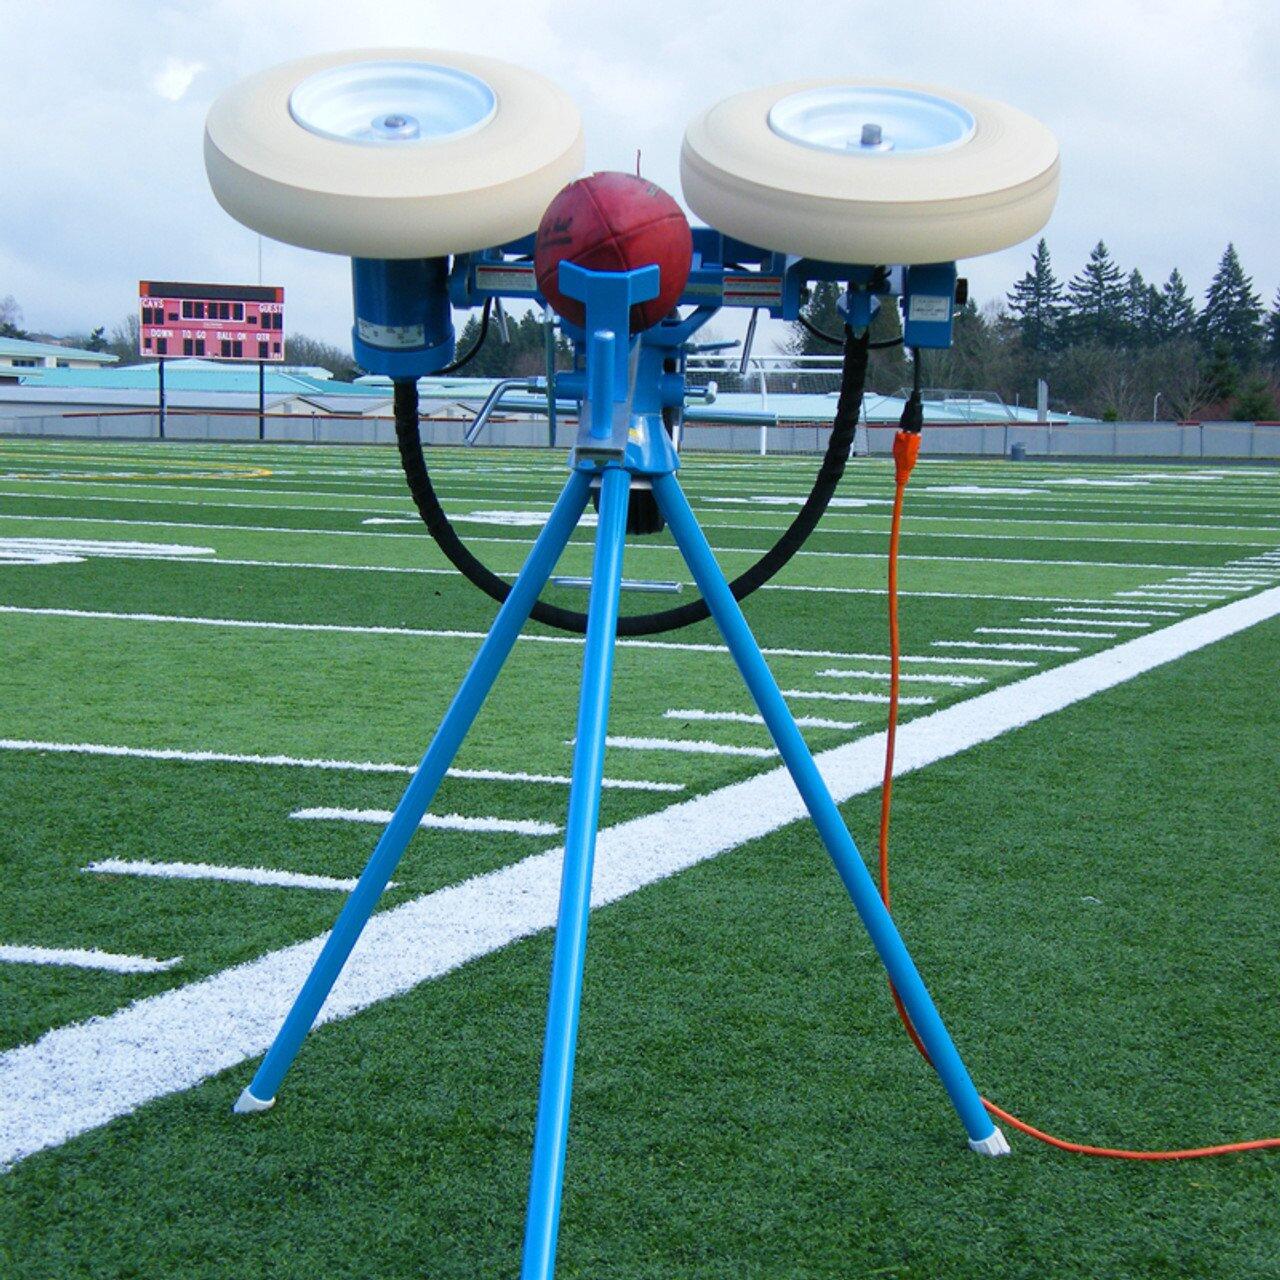 Jugs Rugby ball throwing machine on field